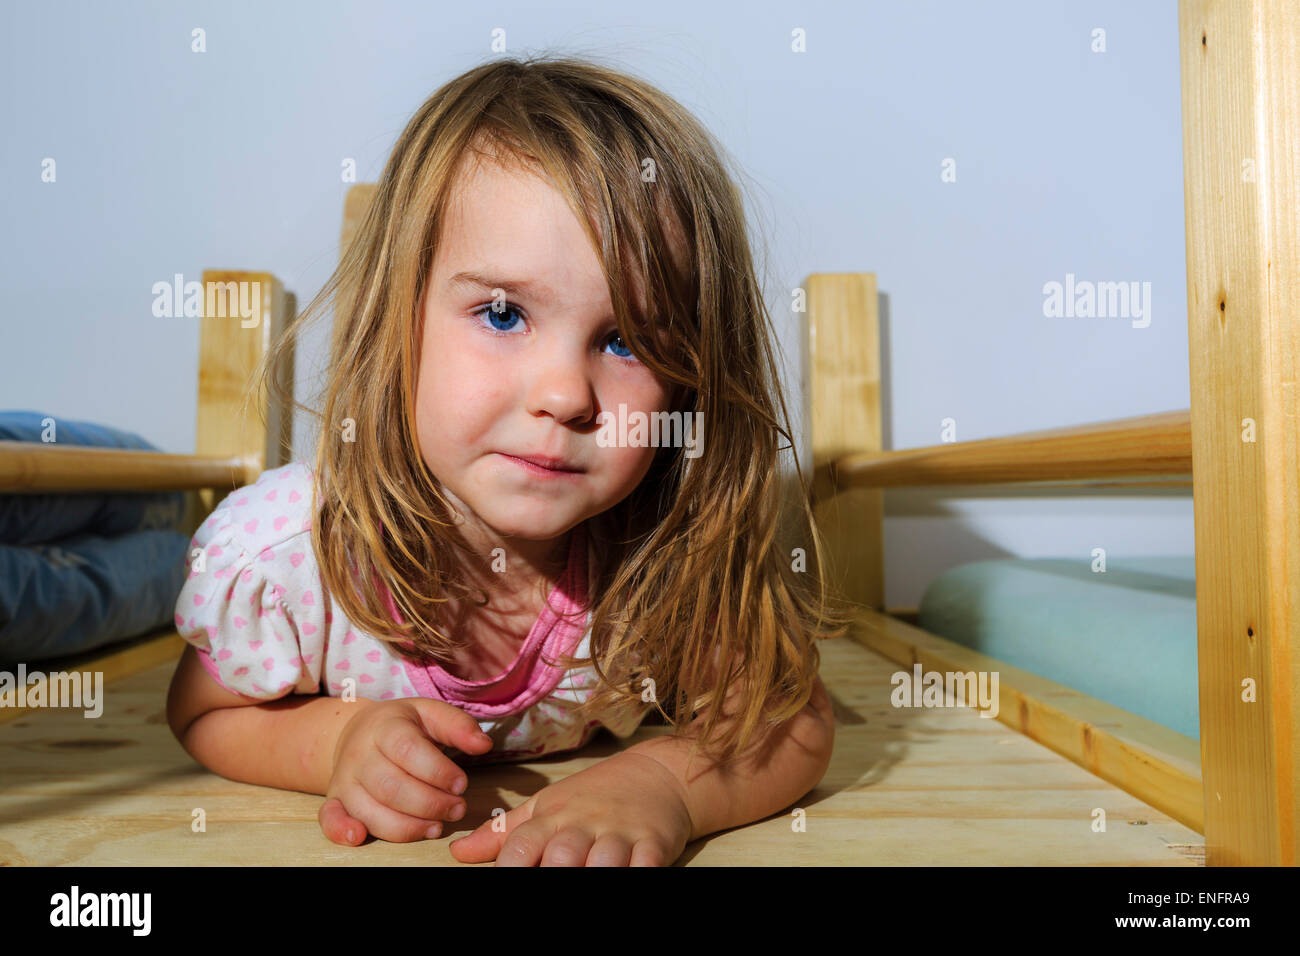 Girl, 3 years, in the kid's room Stock Photo